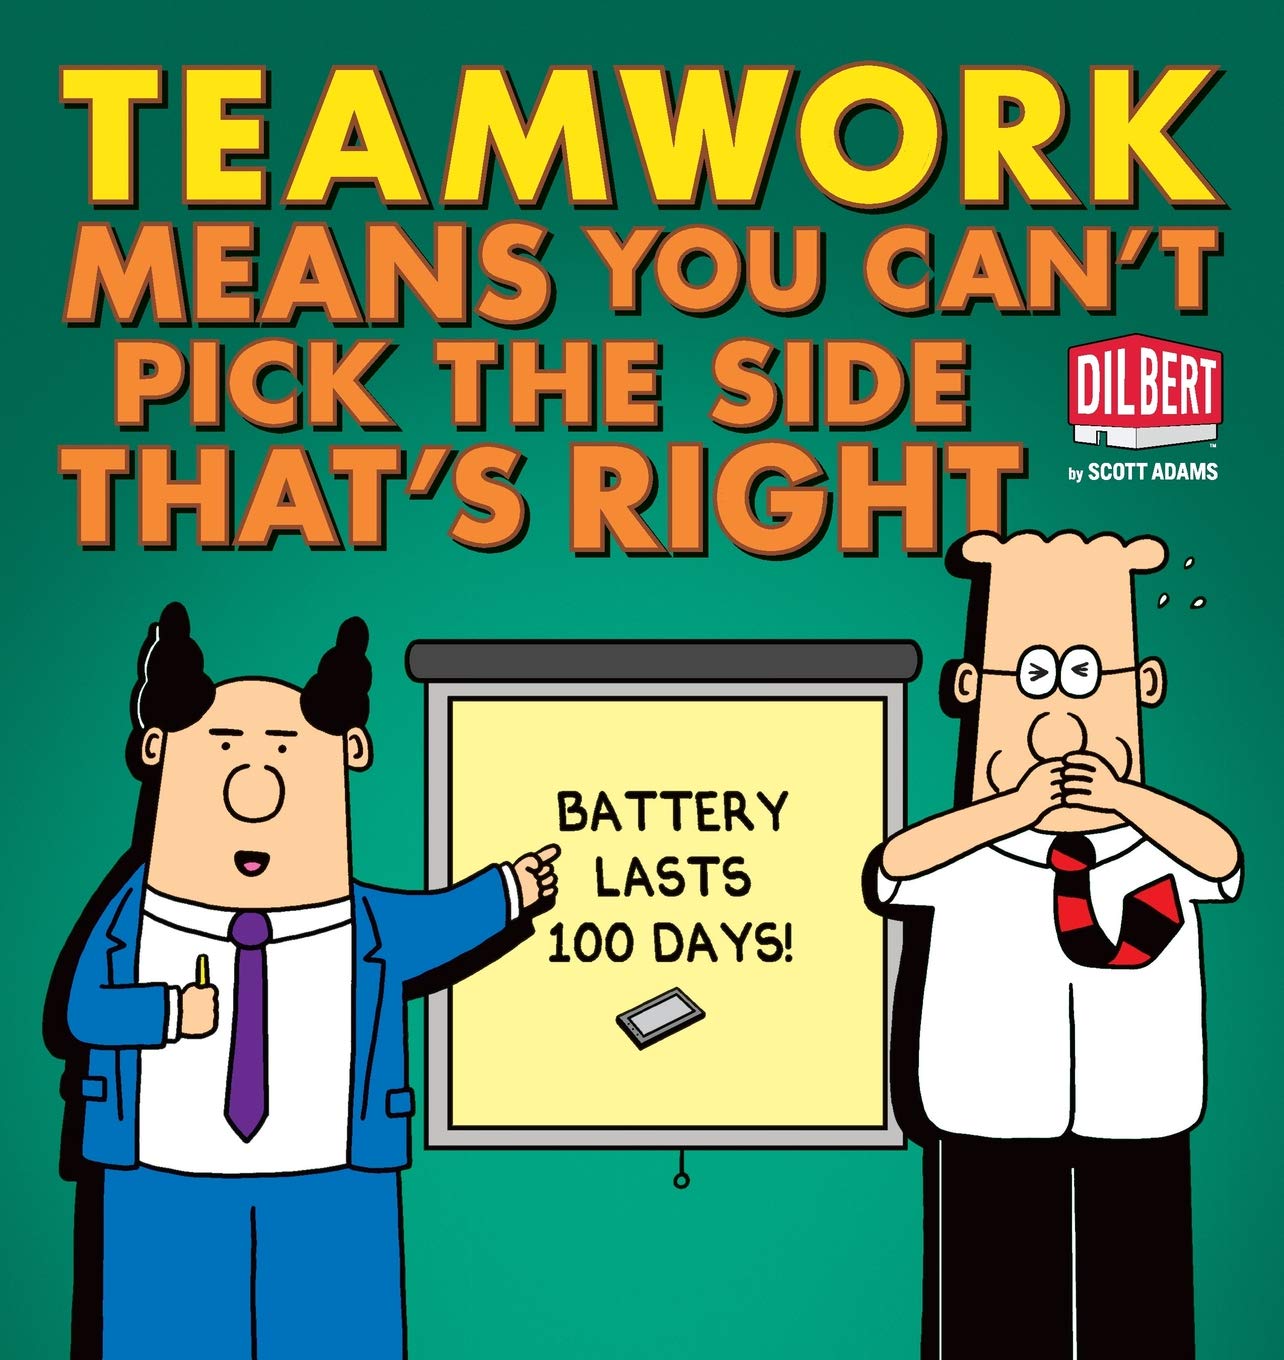 Teamwork Means You Can't Pick the Side that's Right (Volume 38) (Dilbert)